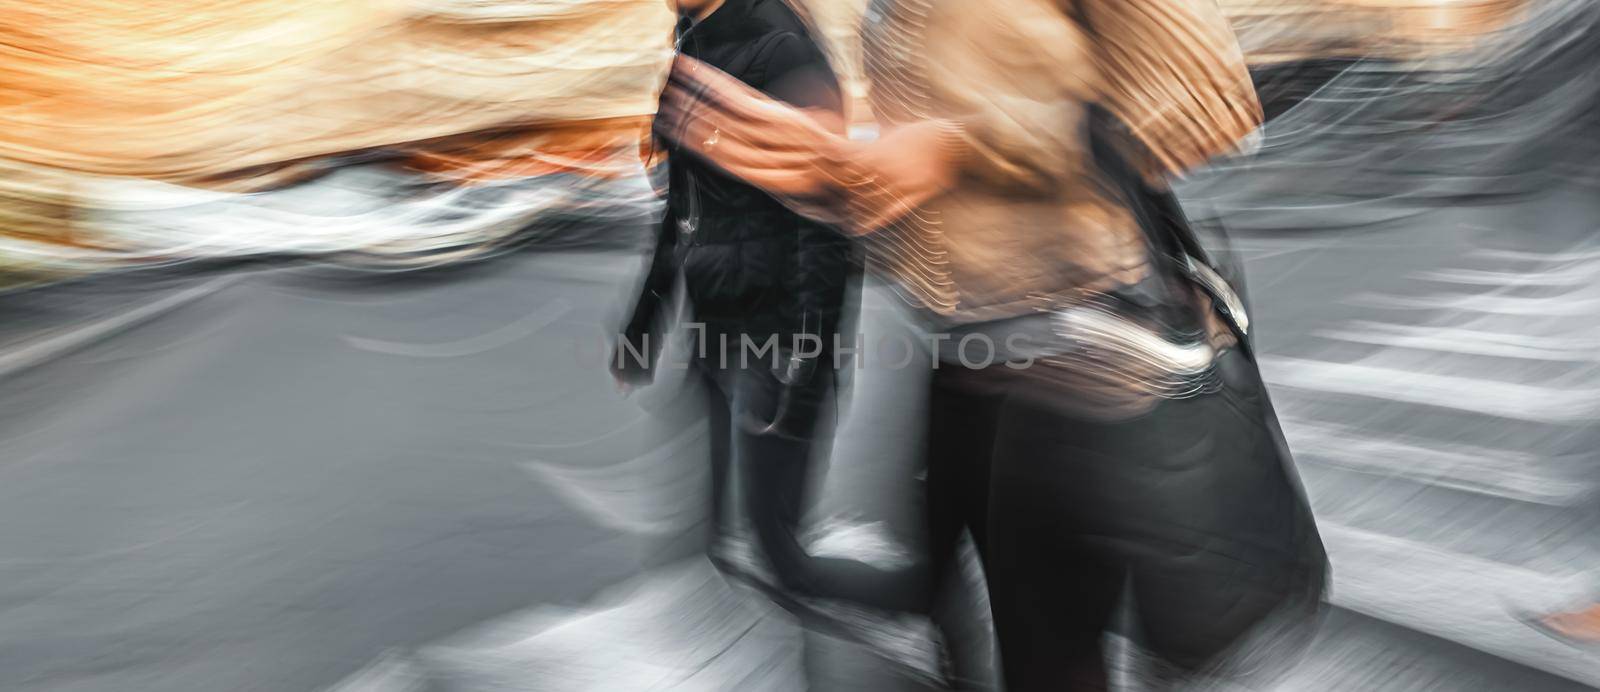 Group of people crossing the street at a crosswalk. Intentional motion blur